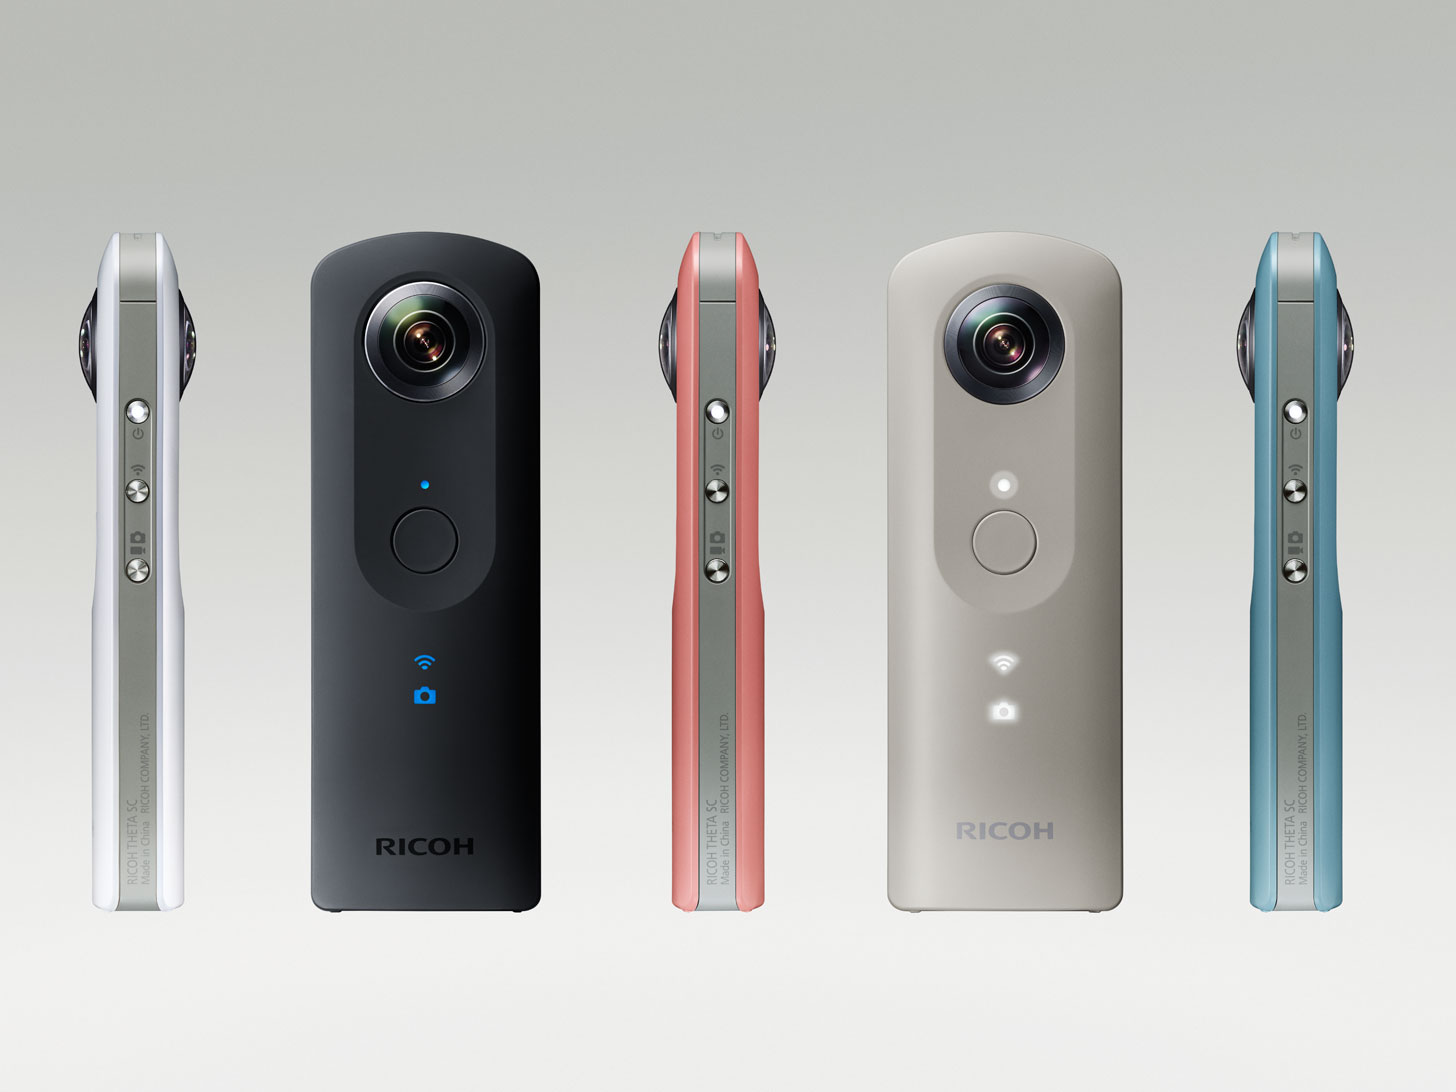 Ricoh Theta SC camera officially annoucned